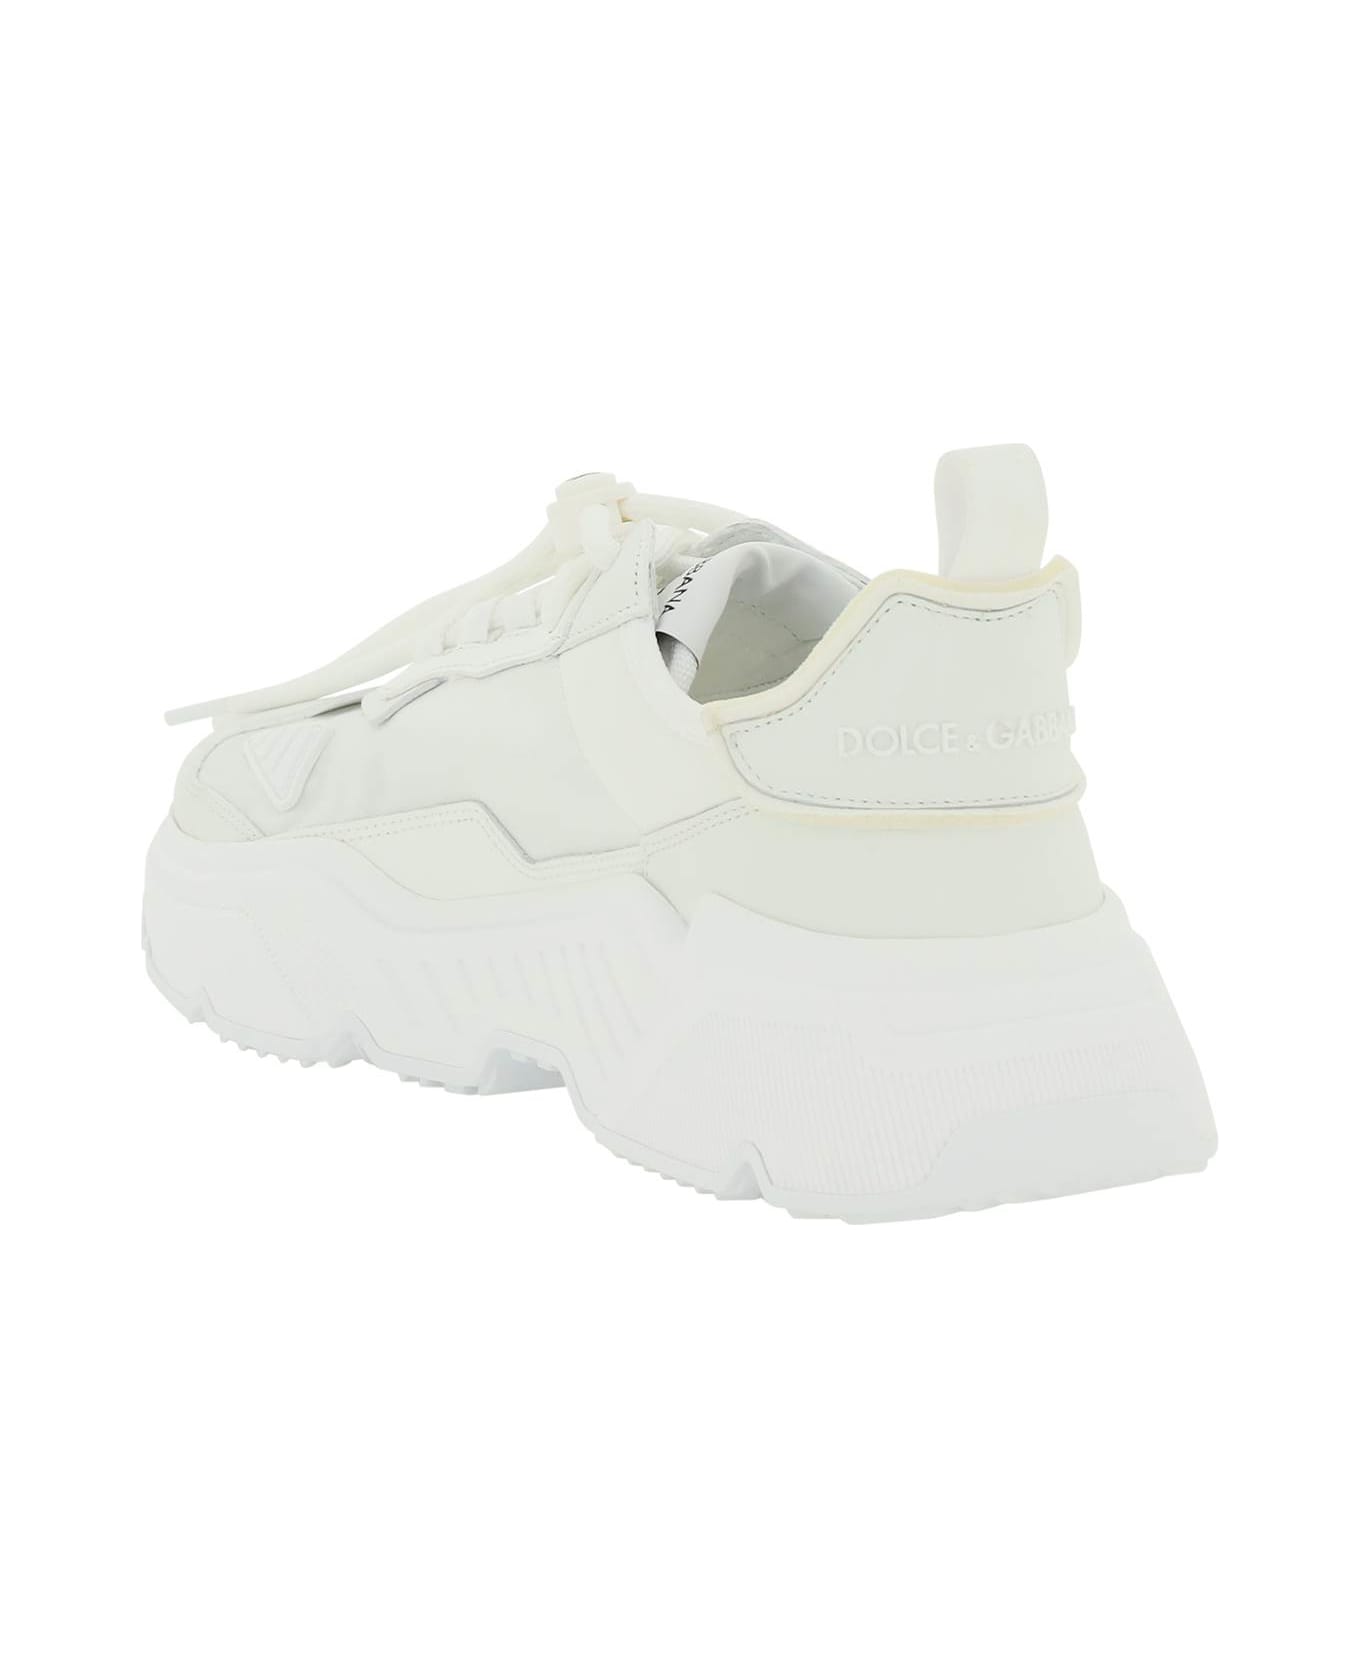 Dolce & Gabbana 'daymaster' Sneakers - White